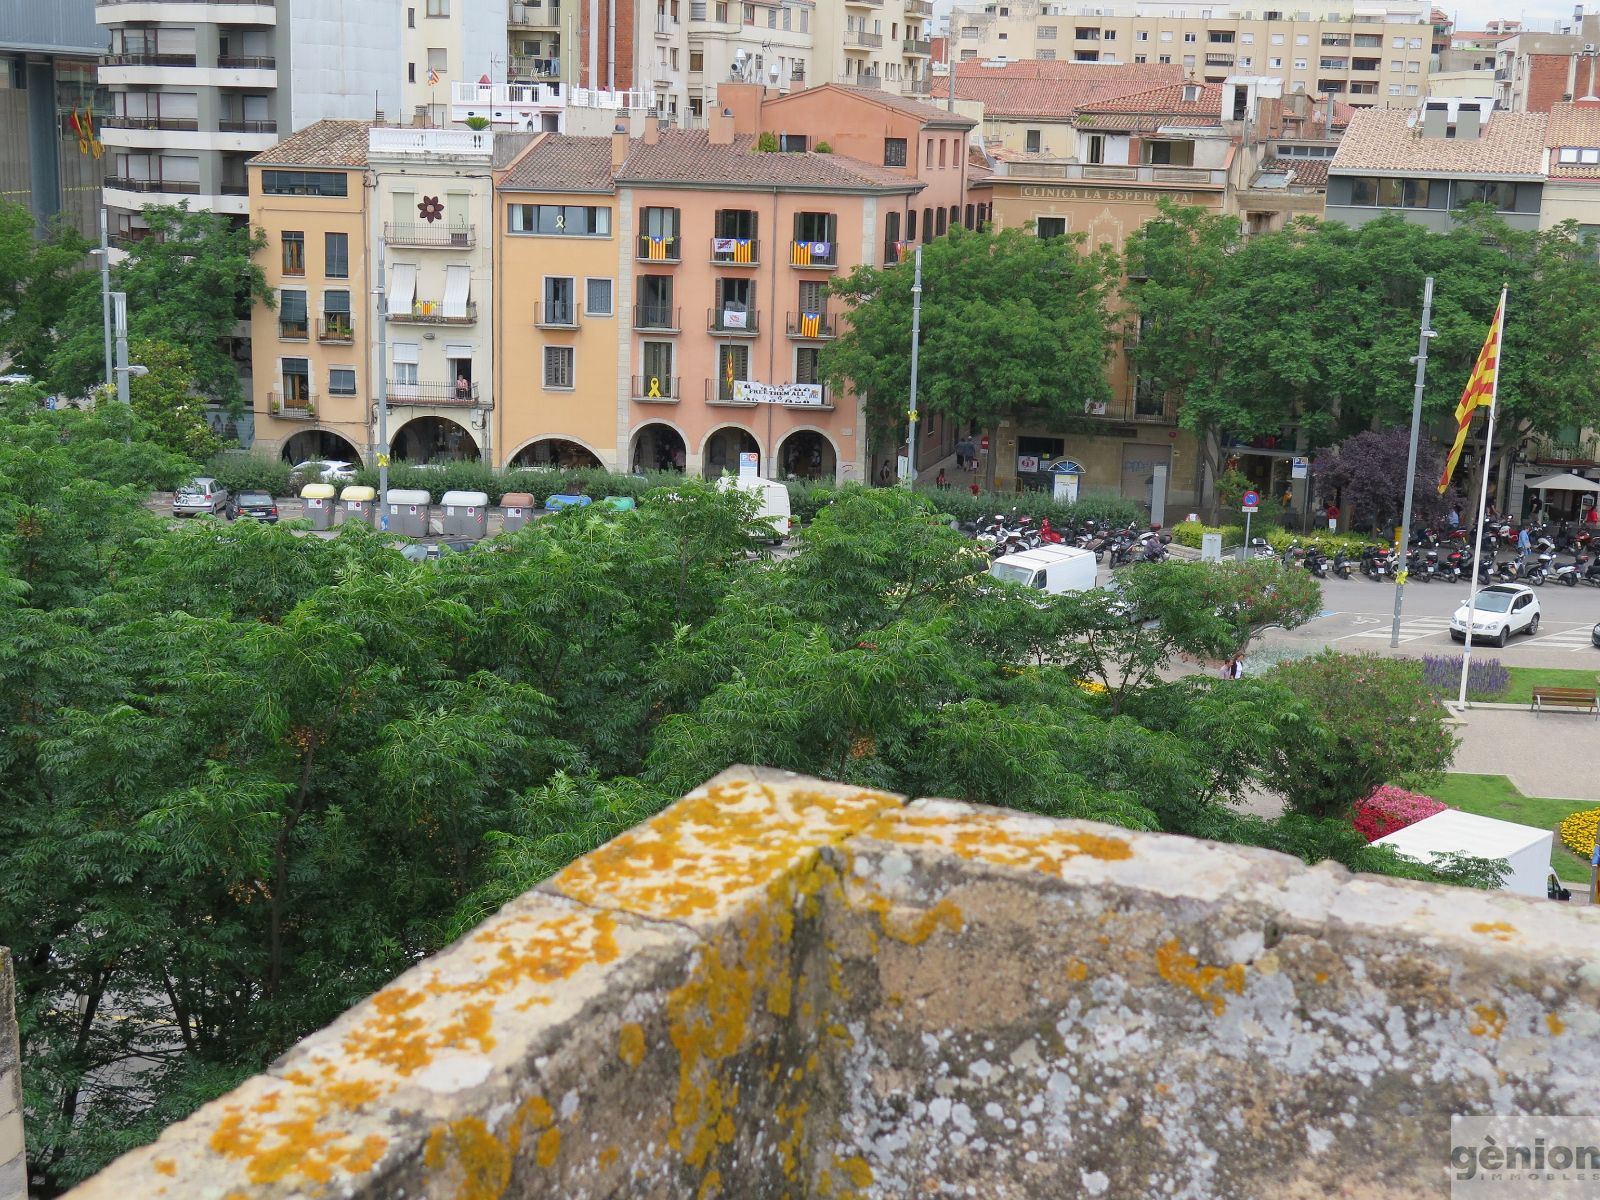 BUILDING IN GIRONA, BARRI VELL. RIGHT IN THE CENTRE, SUITABLE FOR HOTEL OR EXCLUSIVE FLATS